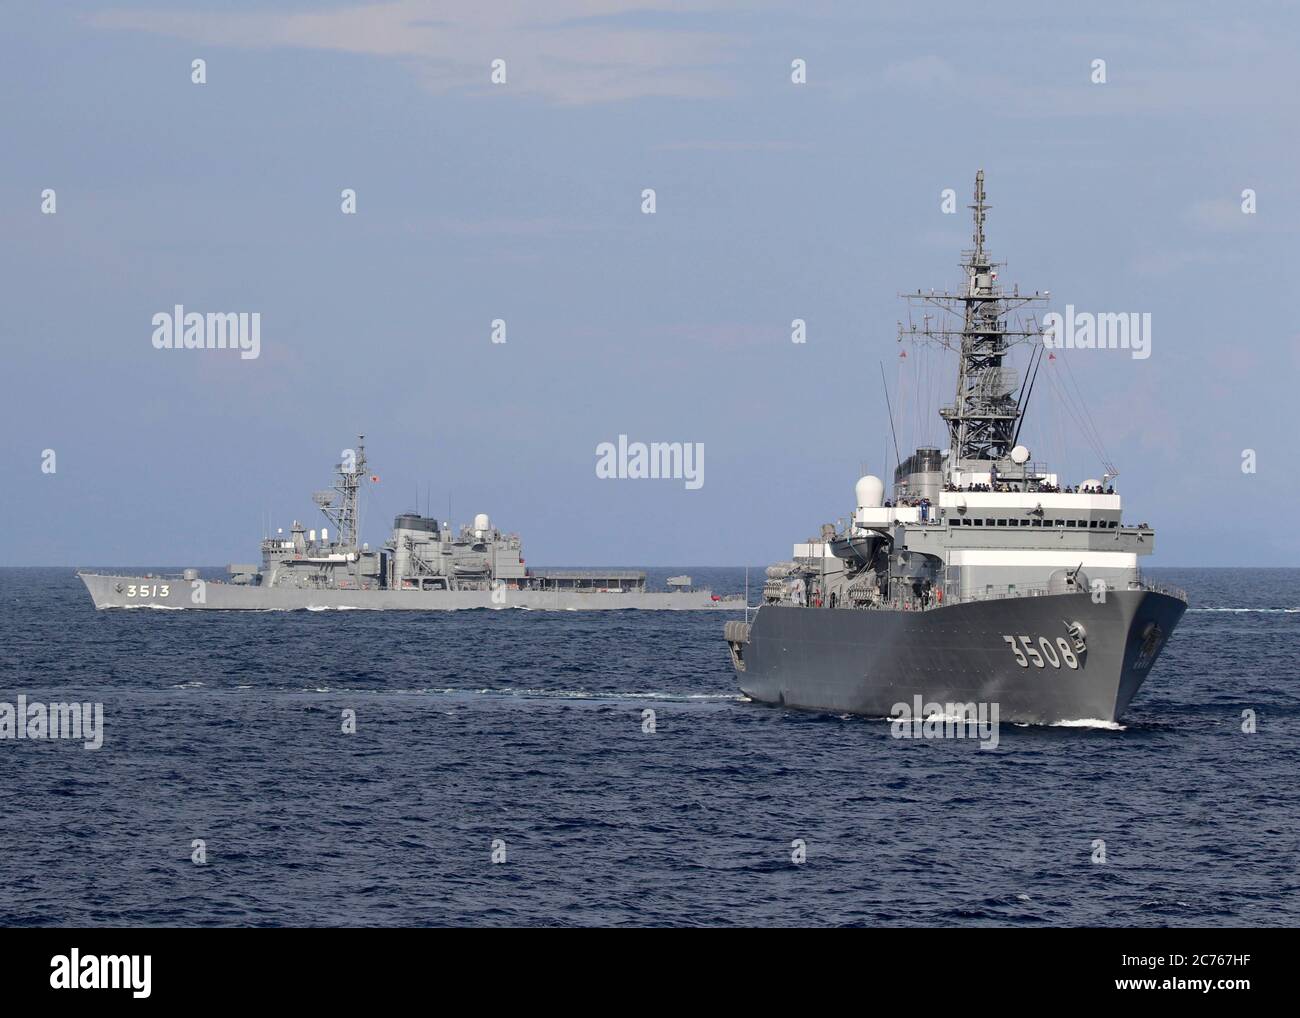 The Japan Maritime Self-Defense Kashima class cadet training ship JS Kashima, right, and Force Hatsuyuki-class destroyer JS Shimayuki during a joint patrol with the U.S. Navy in International Waters May 9, 2020 in the South China Sea. Stock Photo